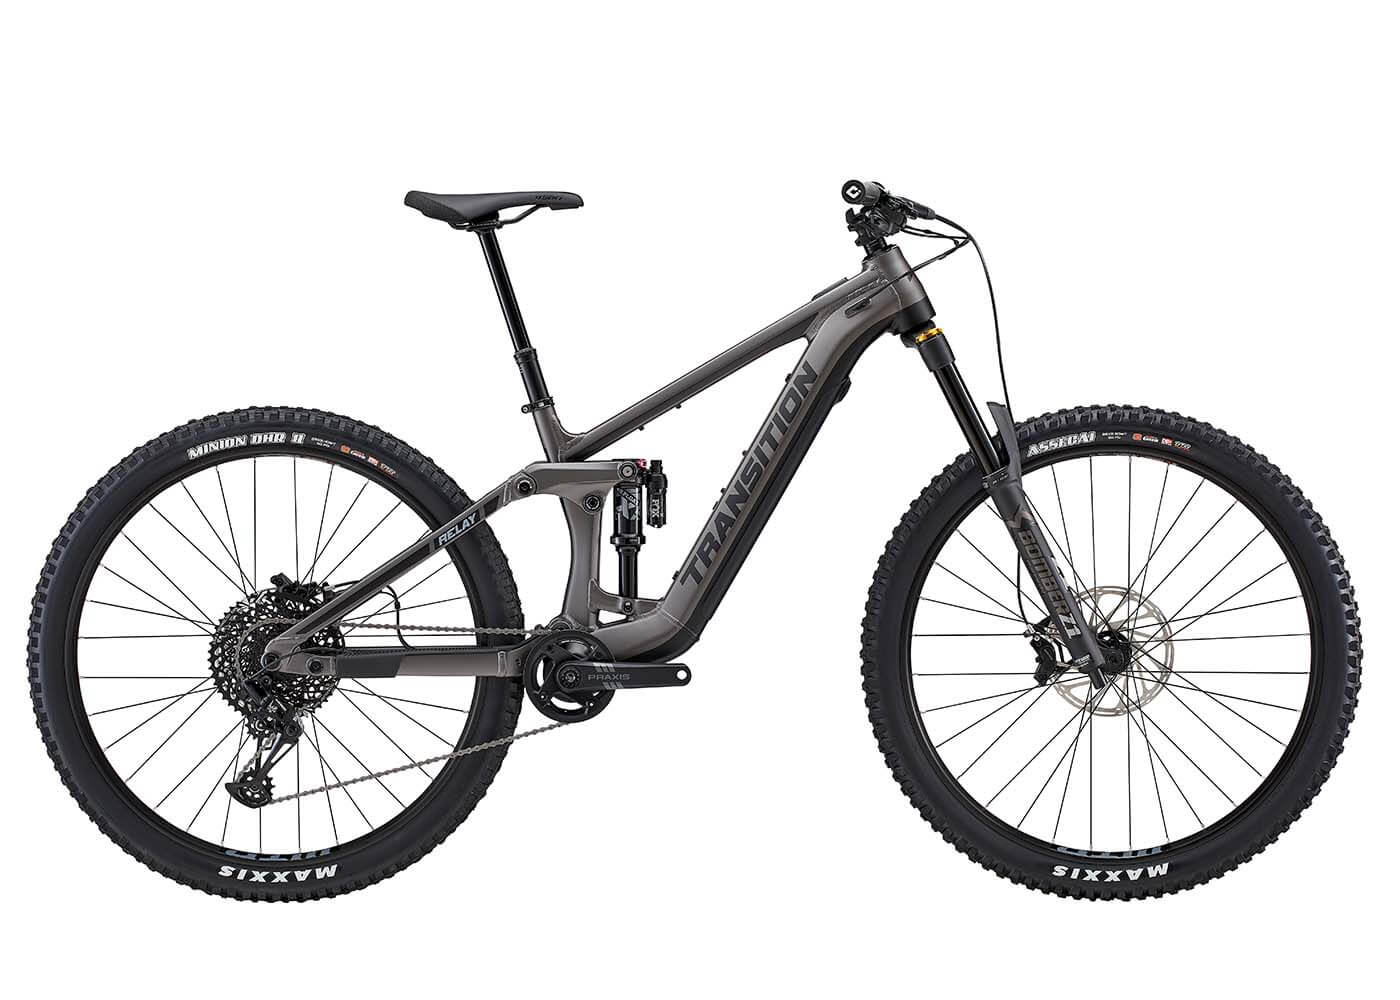 2021 Transition Spire Alloy GX - Specs, Reviews, Images - Mountain